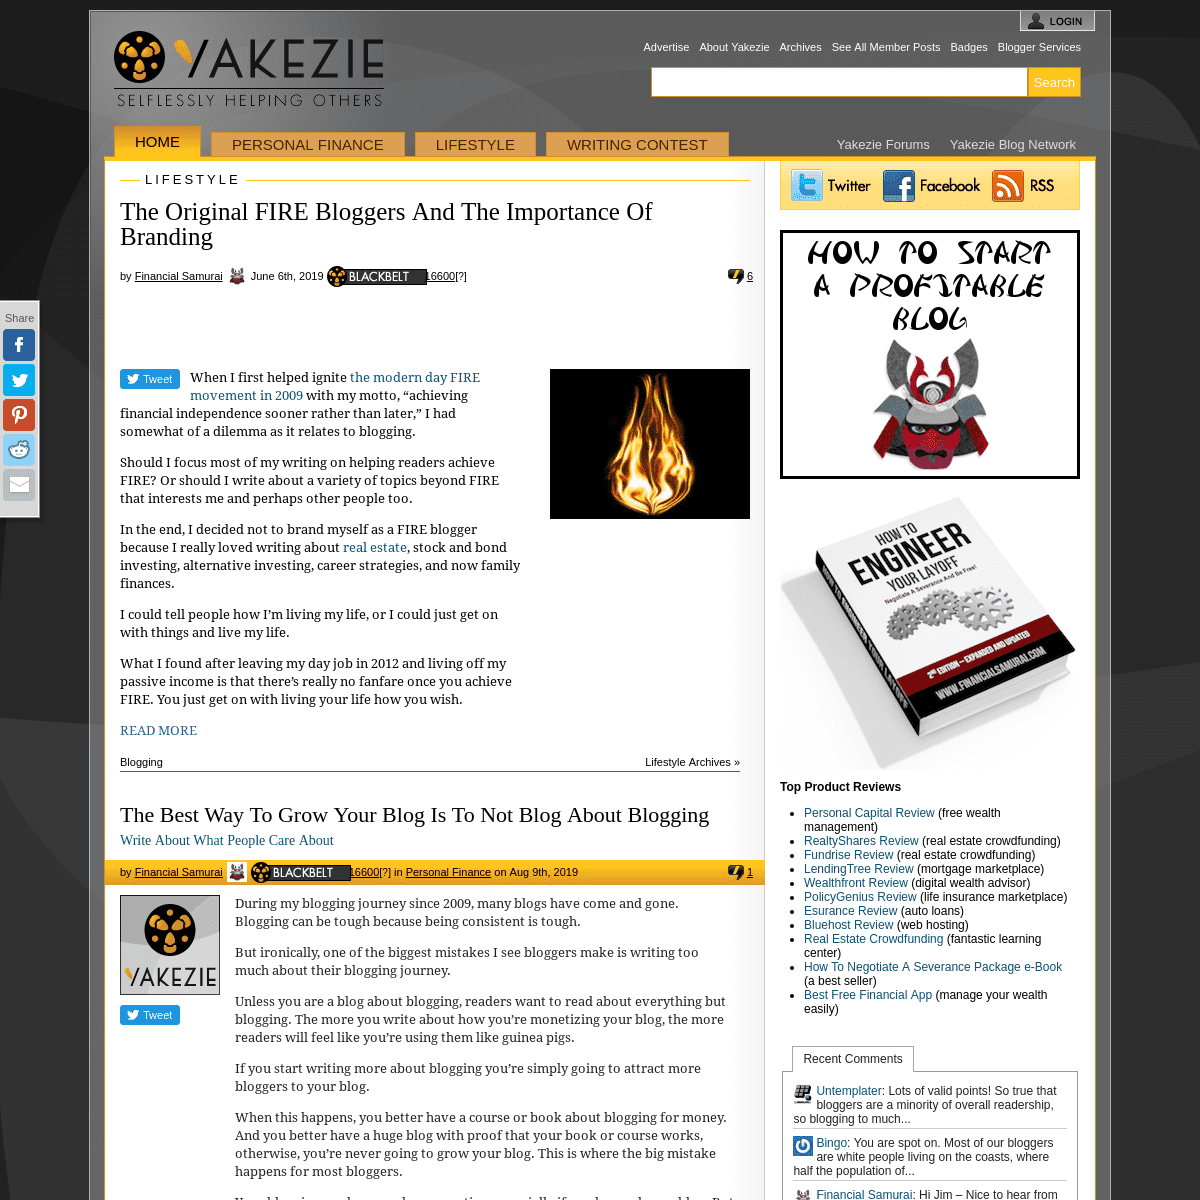 A complete backup of yakezie.com